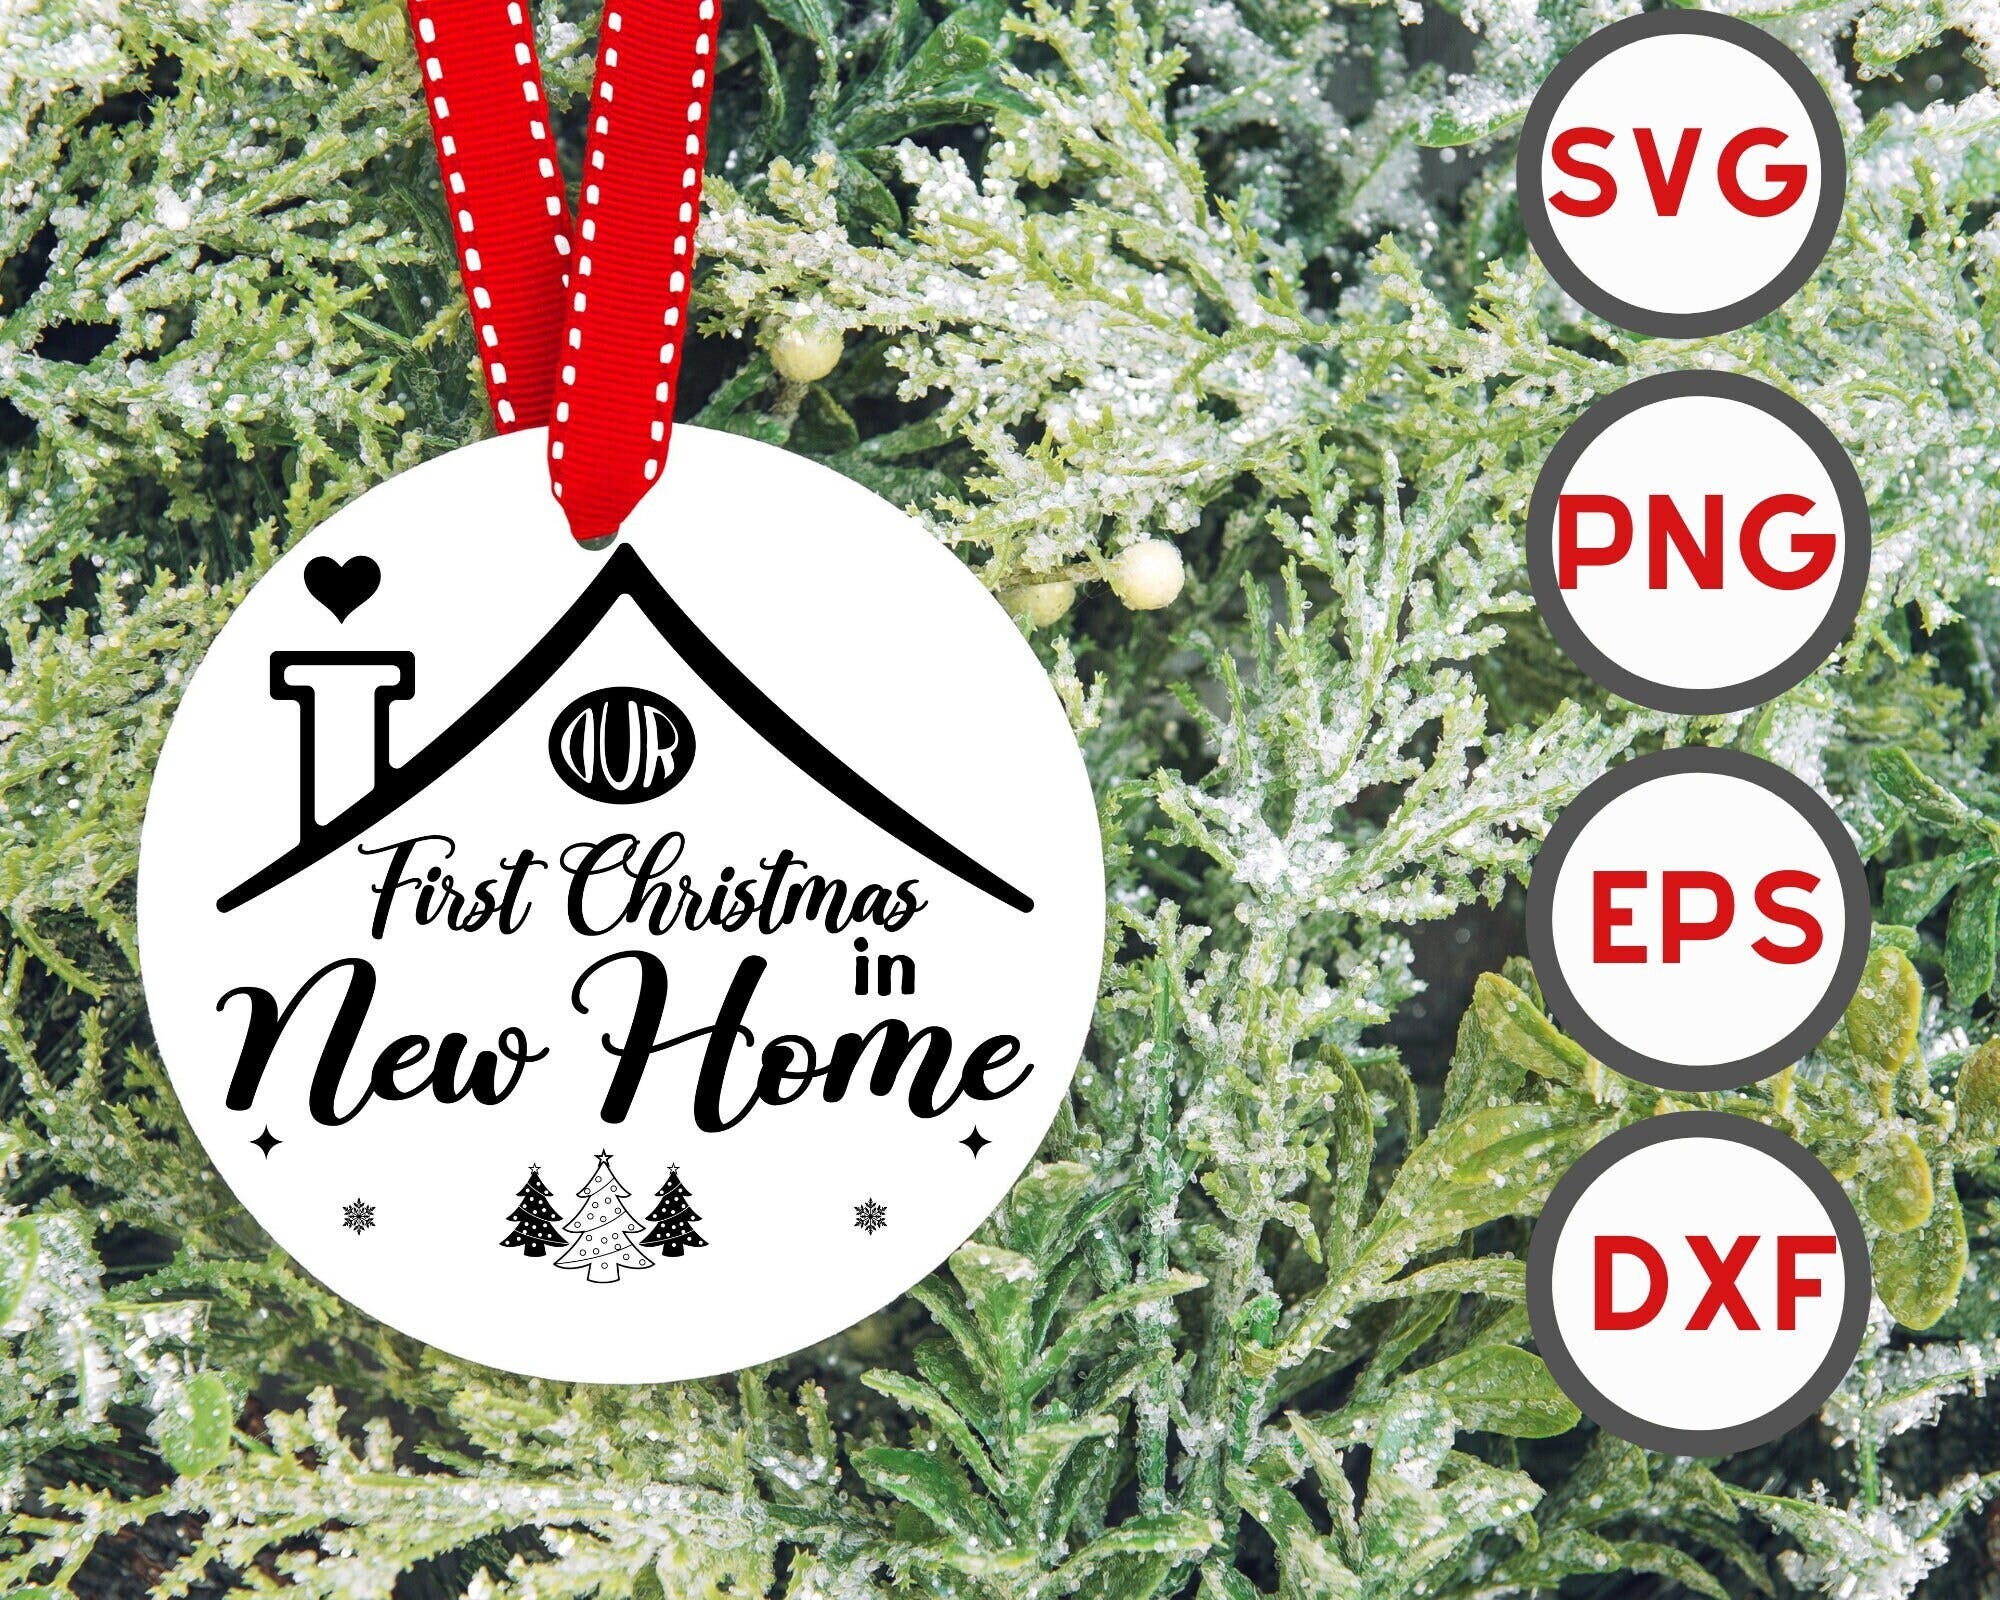 Our First Christmas In Our New Home Svg, Our First Christmas Svg, 2021 Svg, Christmas Ornament Svg, Png File, Cut File, Digital Download